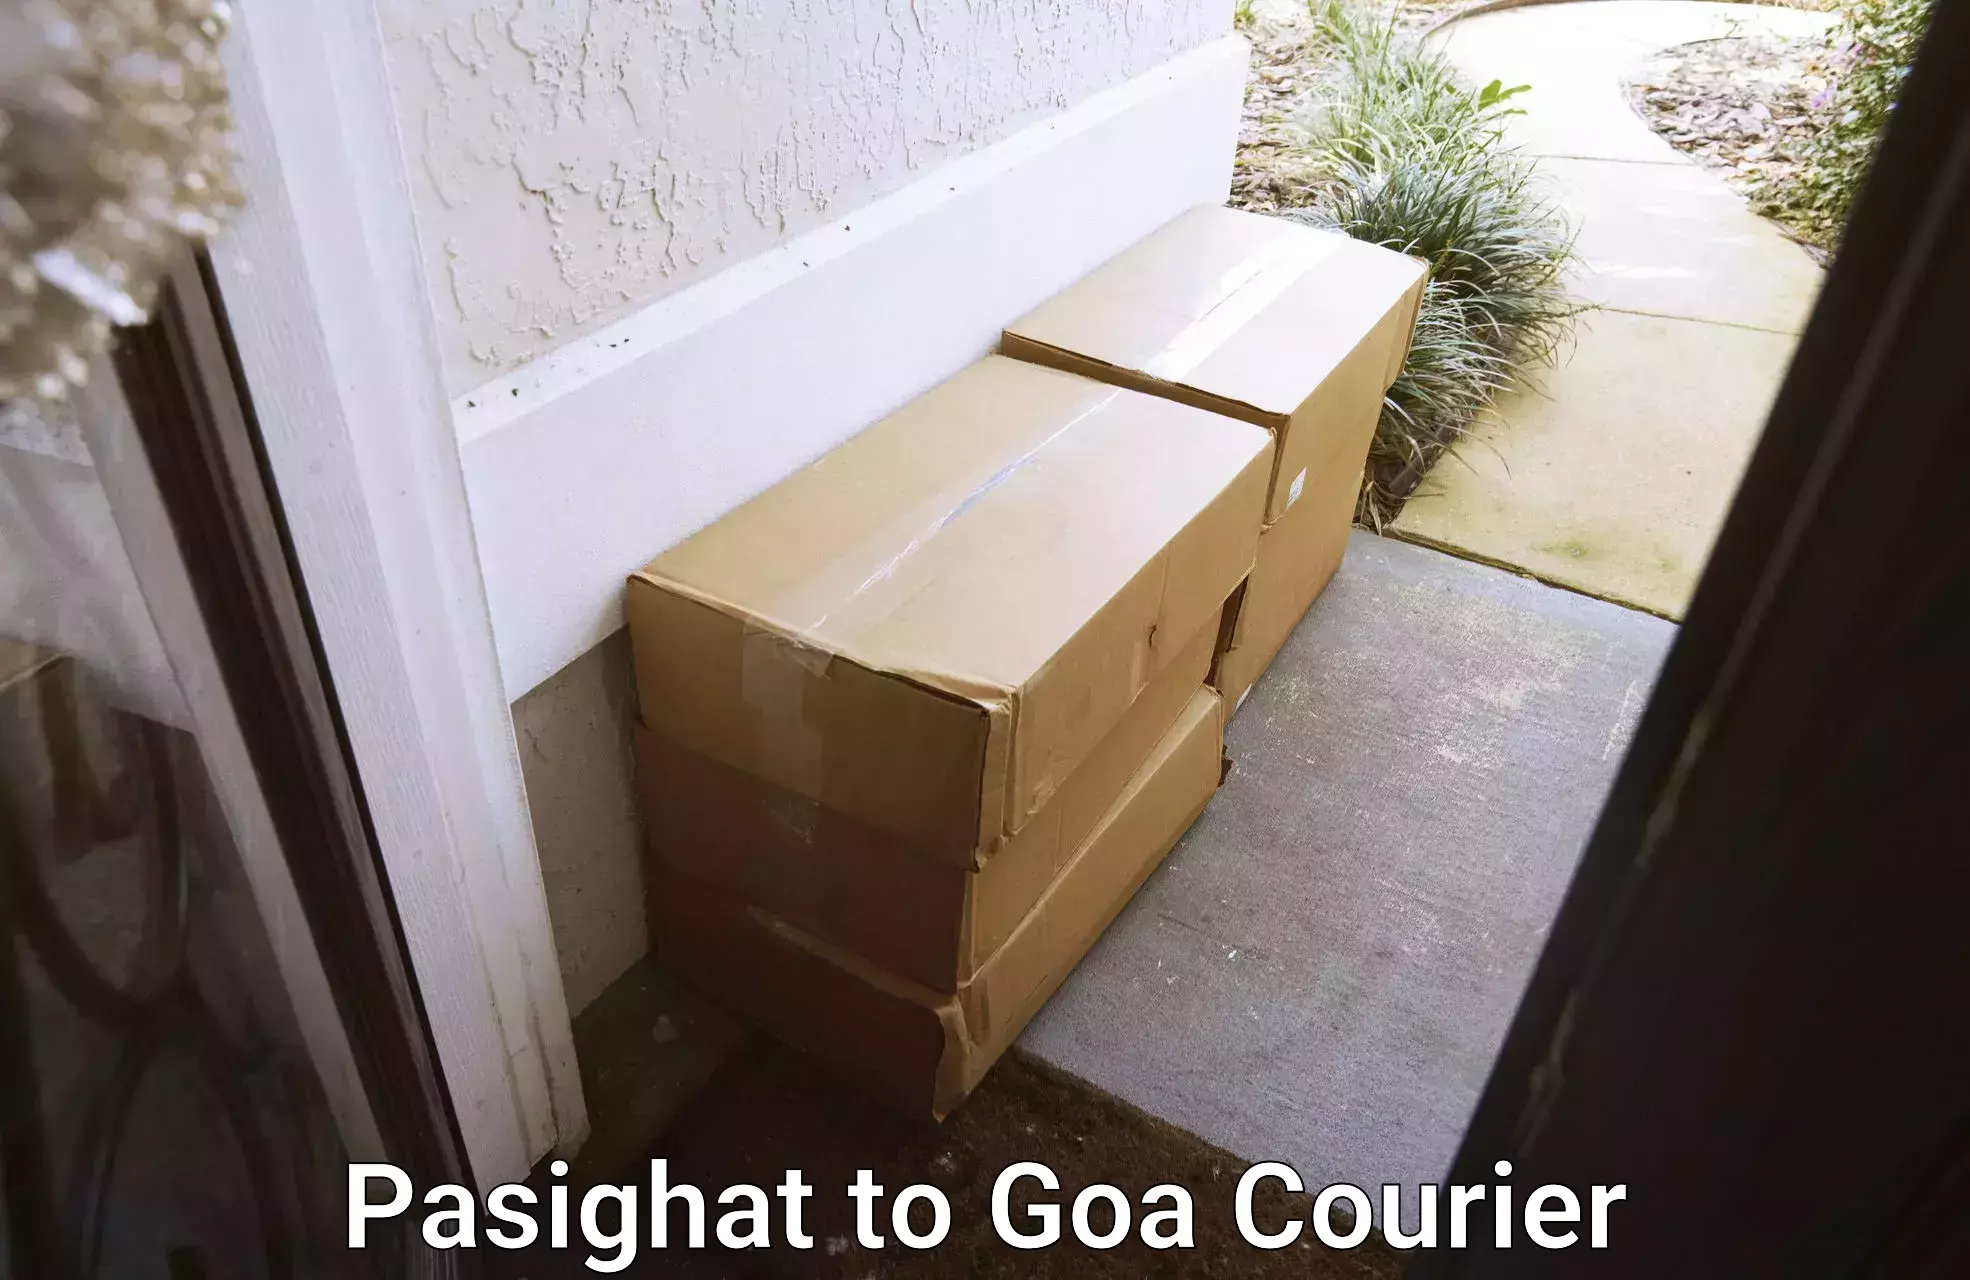 Full-service courier options Pasighat to Goa